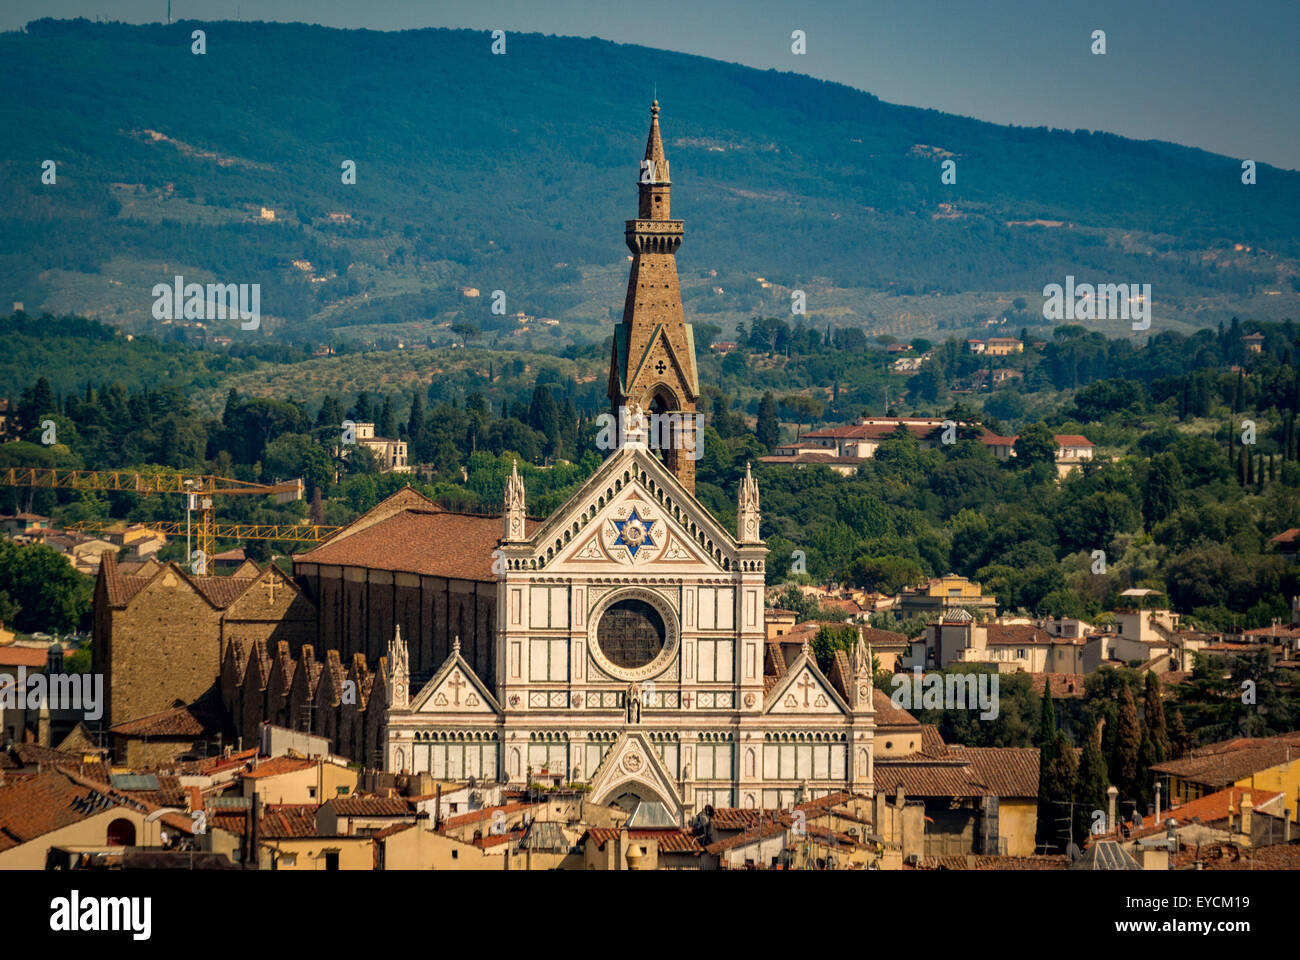 Buried place of Michelangelo and Galileo. Florence, Italy. Stock Photo